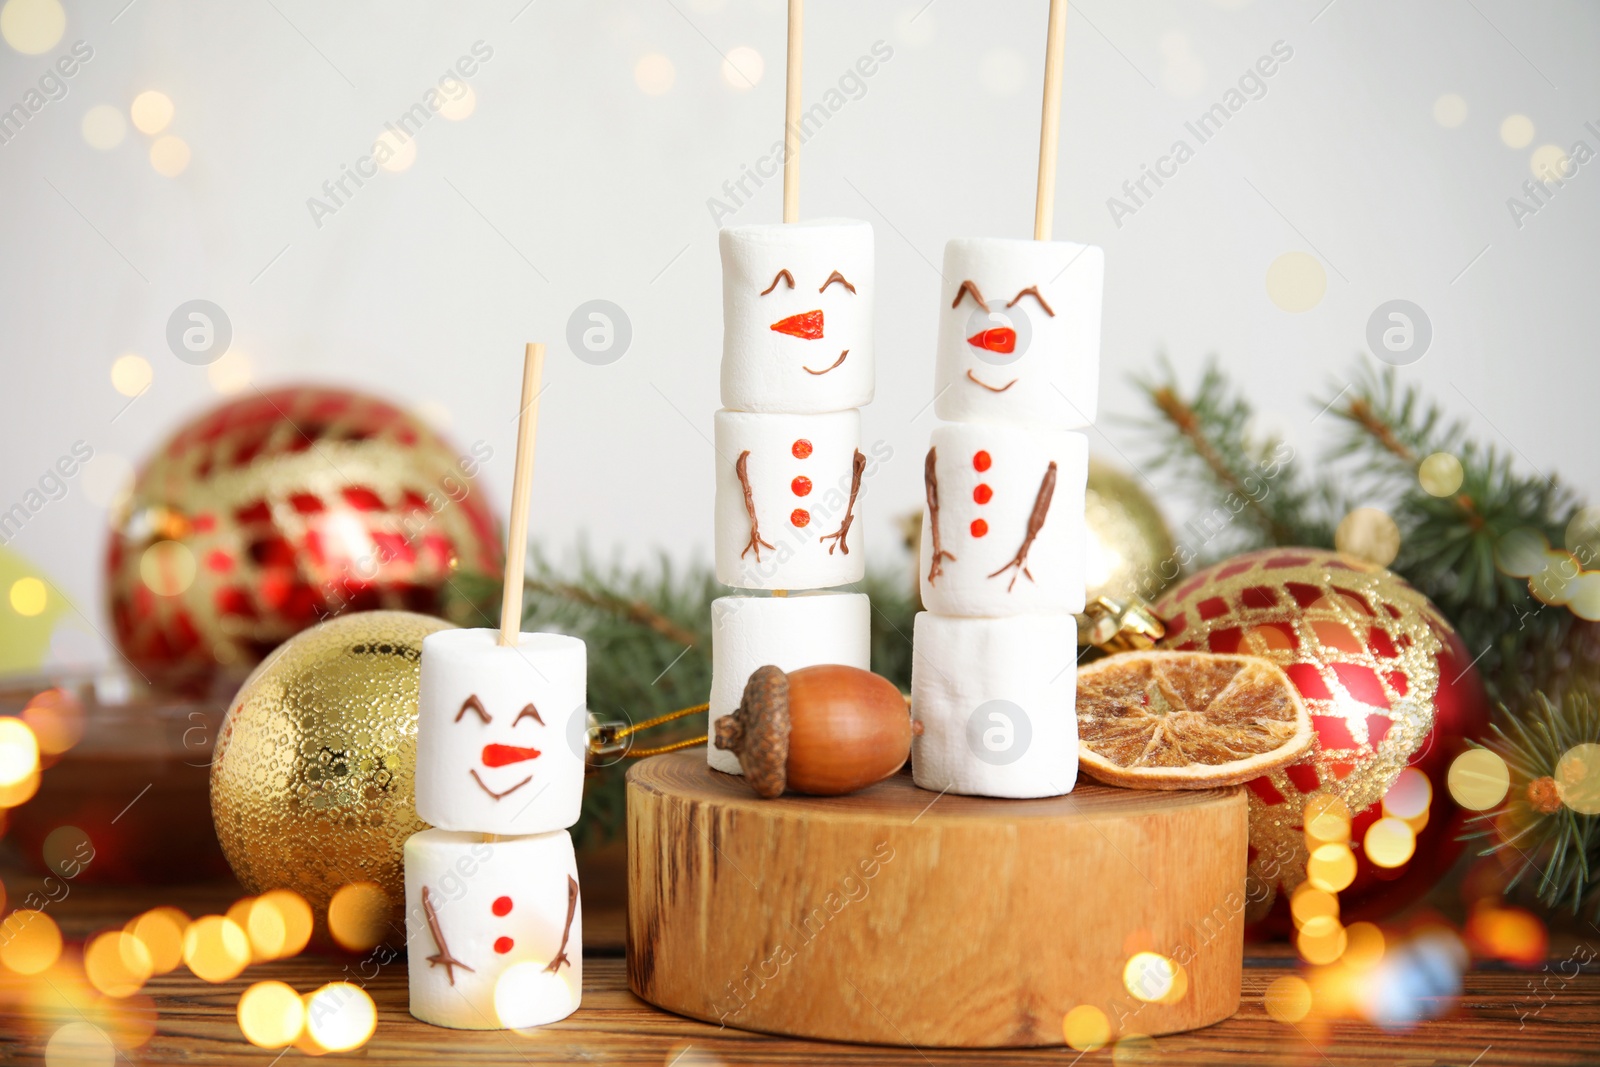 Image of Funny snowmen made of marshmallows and Christmas decor on wooden table. Bokeh effect 